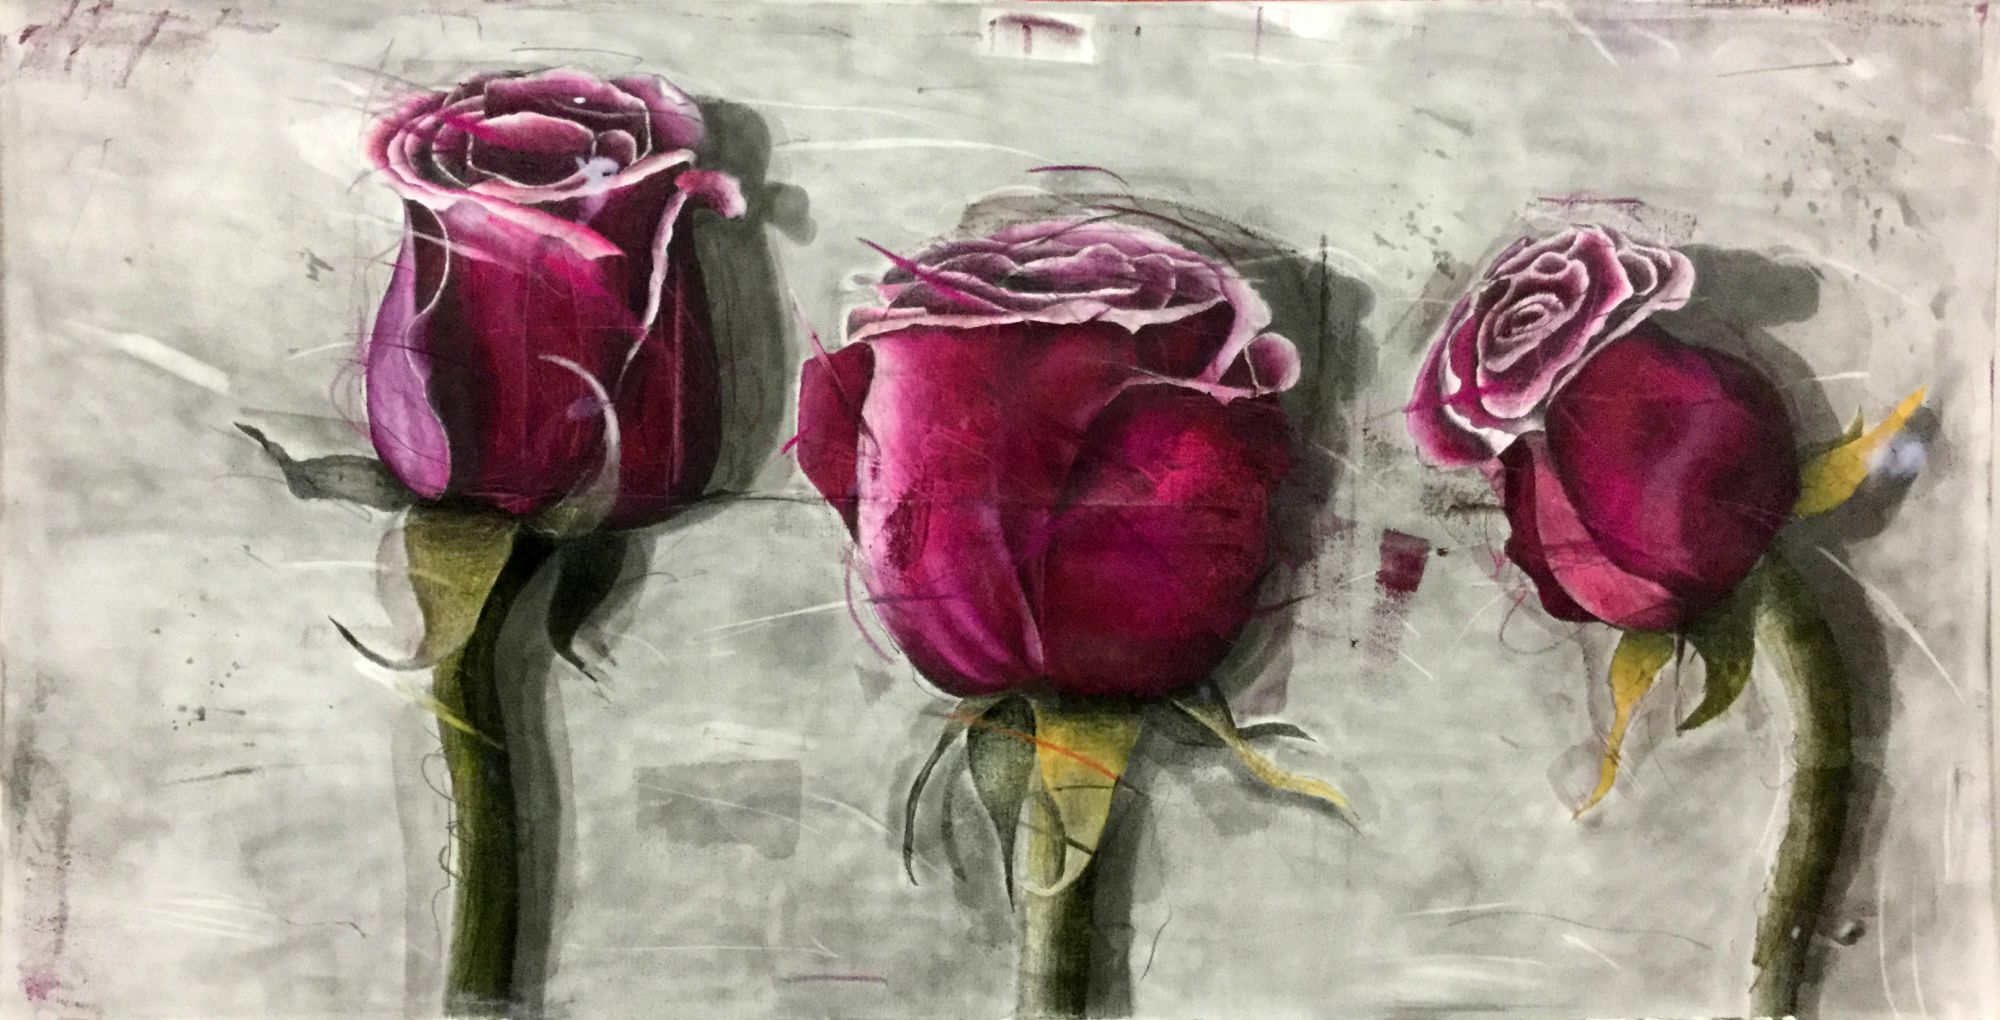 Picture "3 Roses" (2017) (Unique piece) by Josef Hirthammer